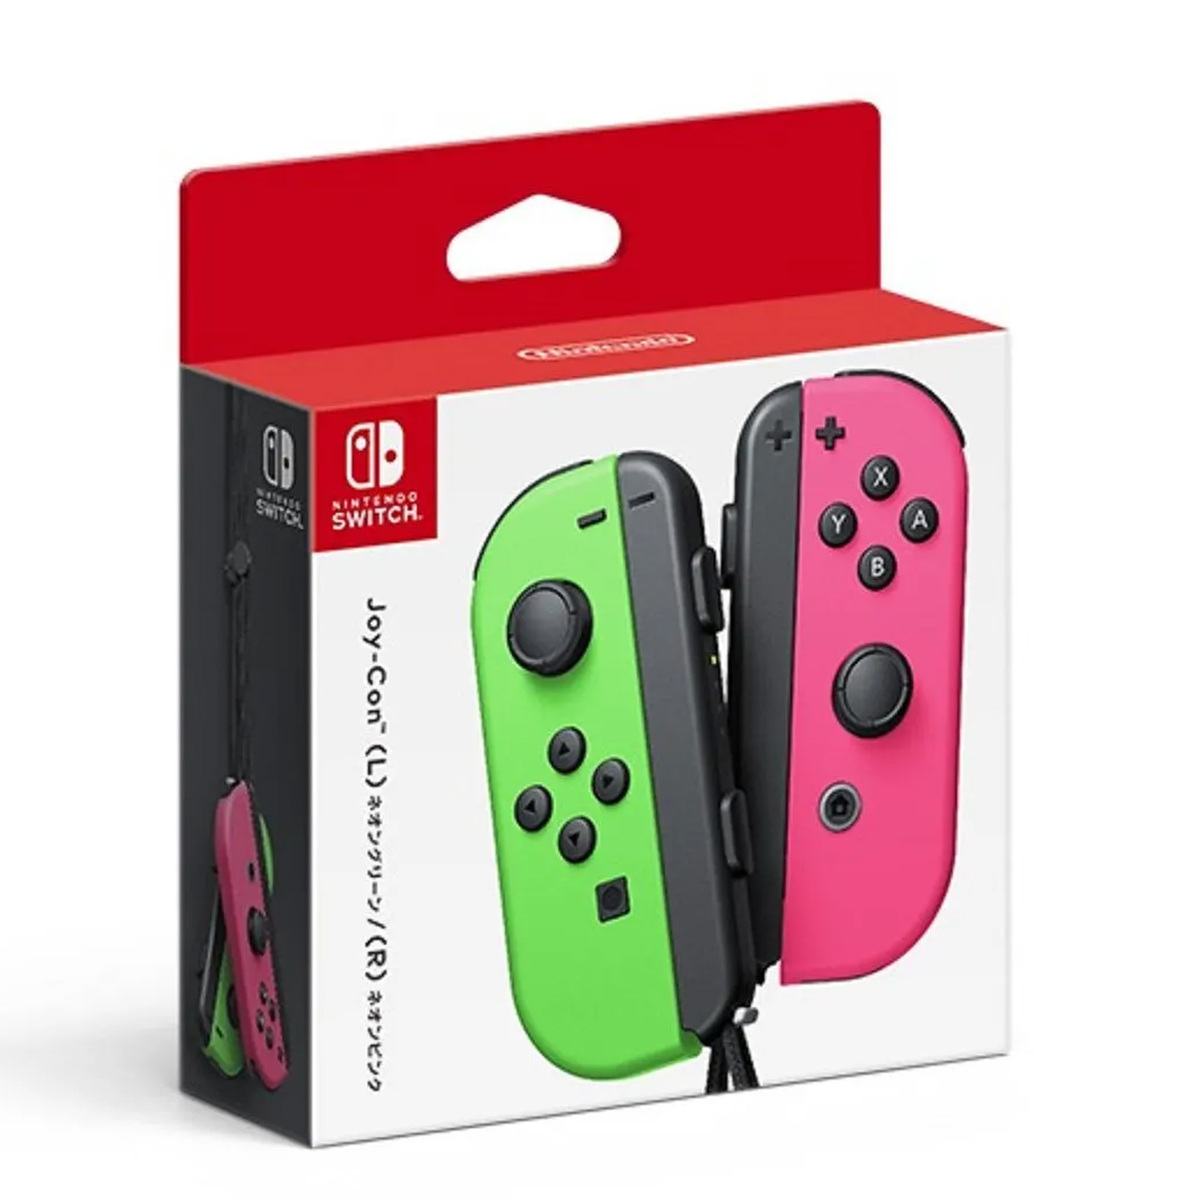 Nintendo Switch Joy-Con Controllers, Neon Pink and Neon Green